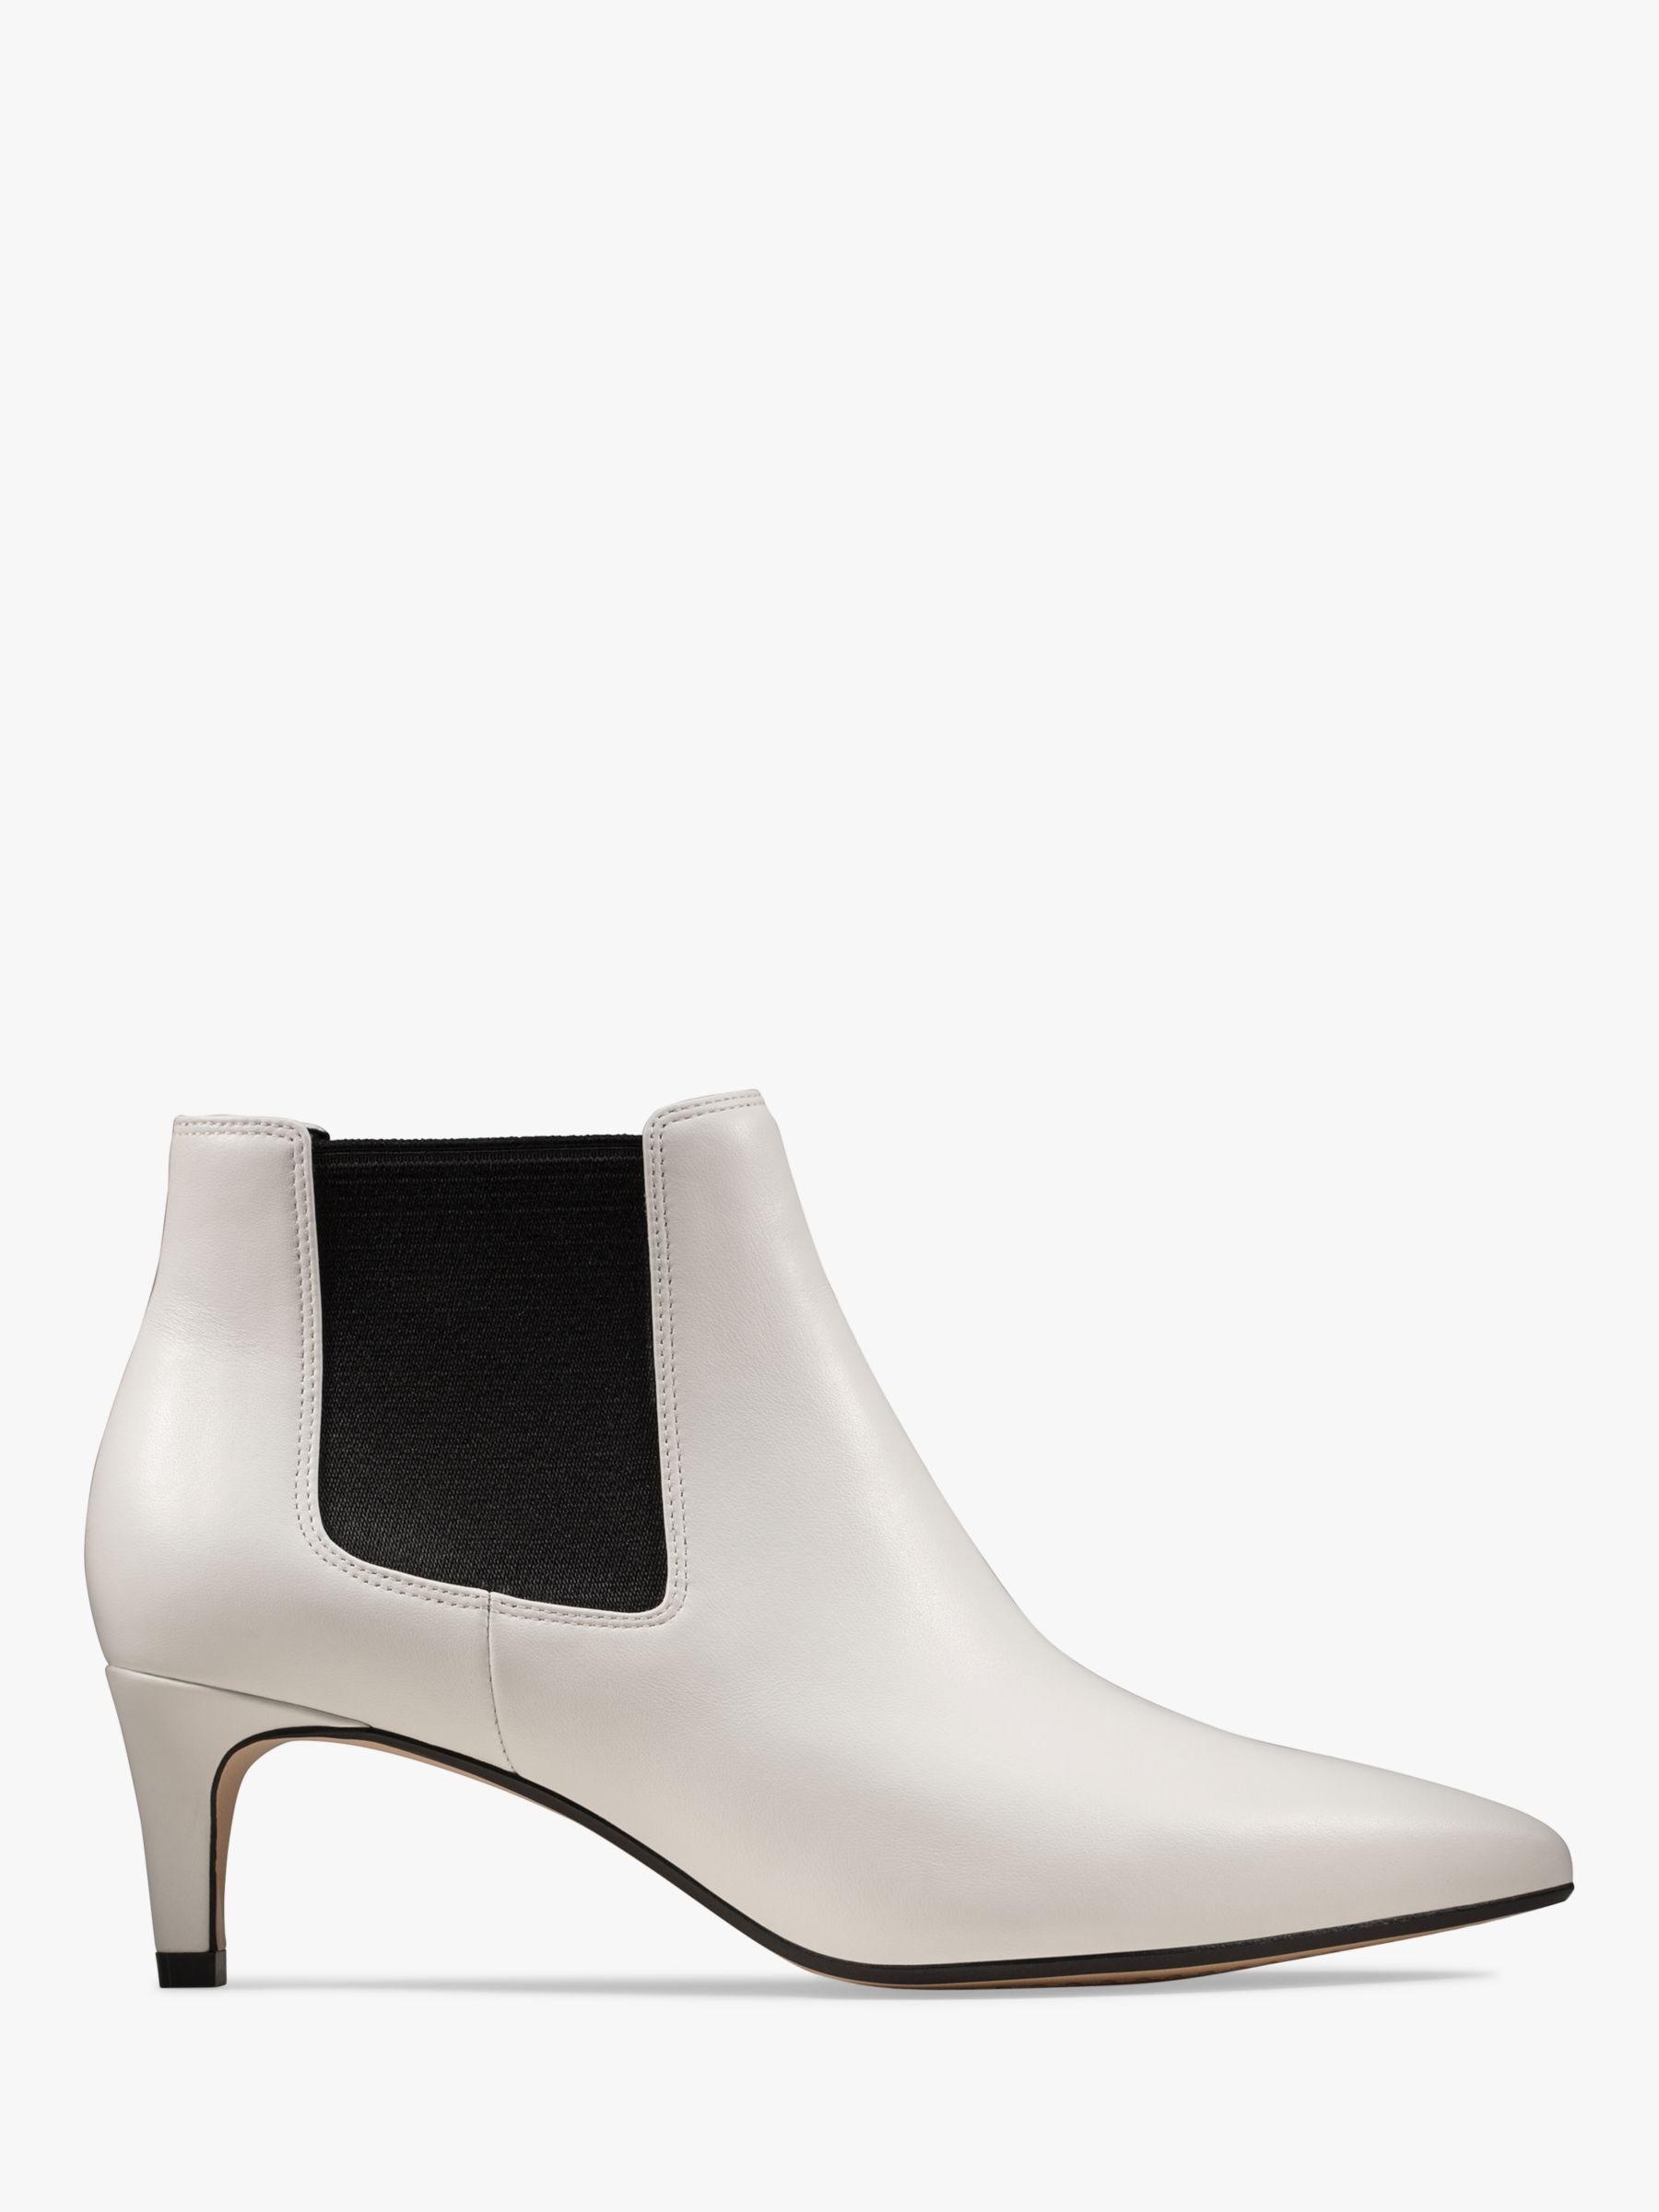 clarks ankle boots low heel